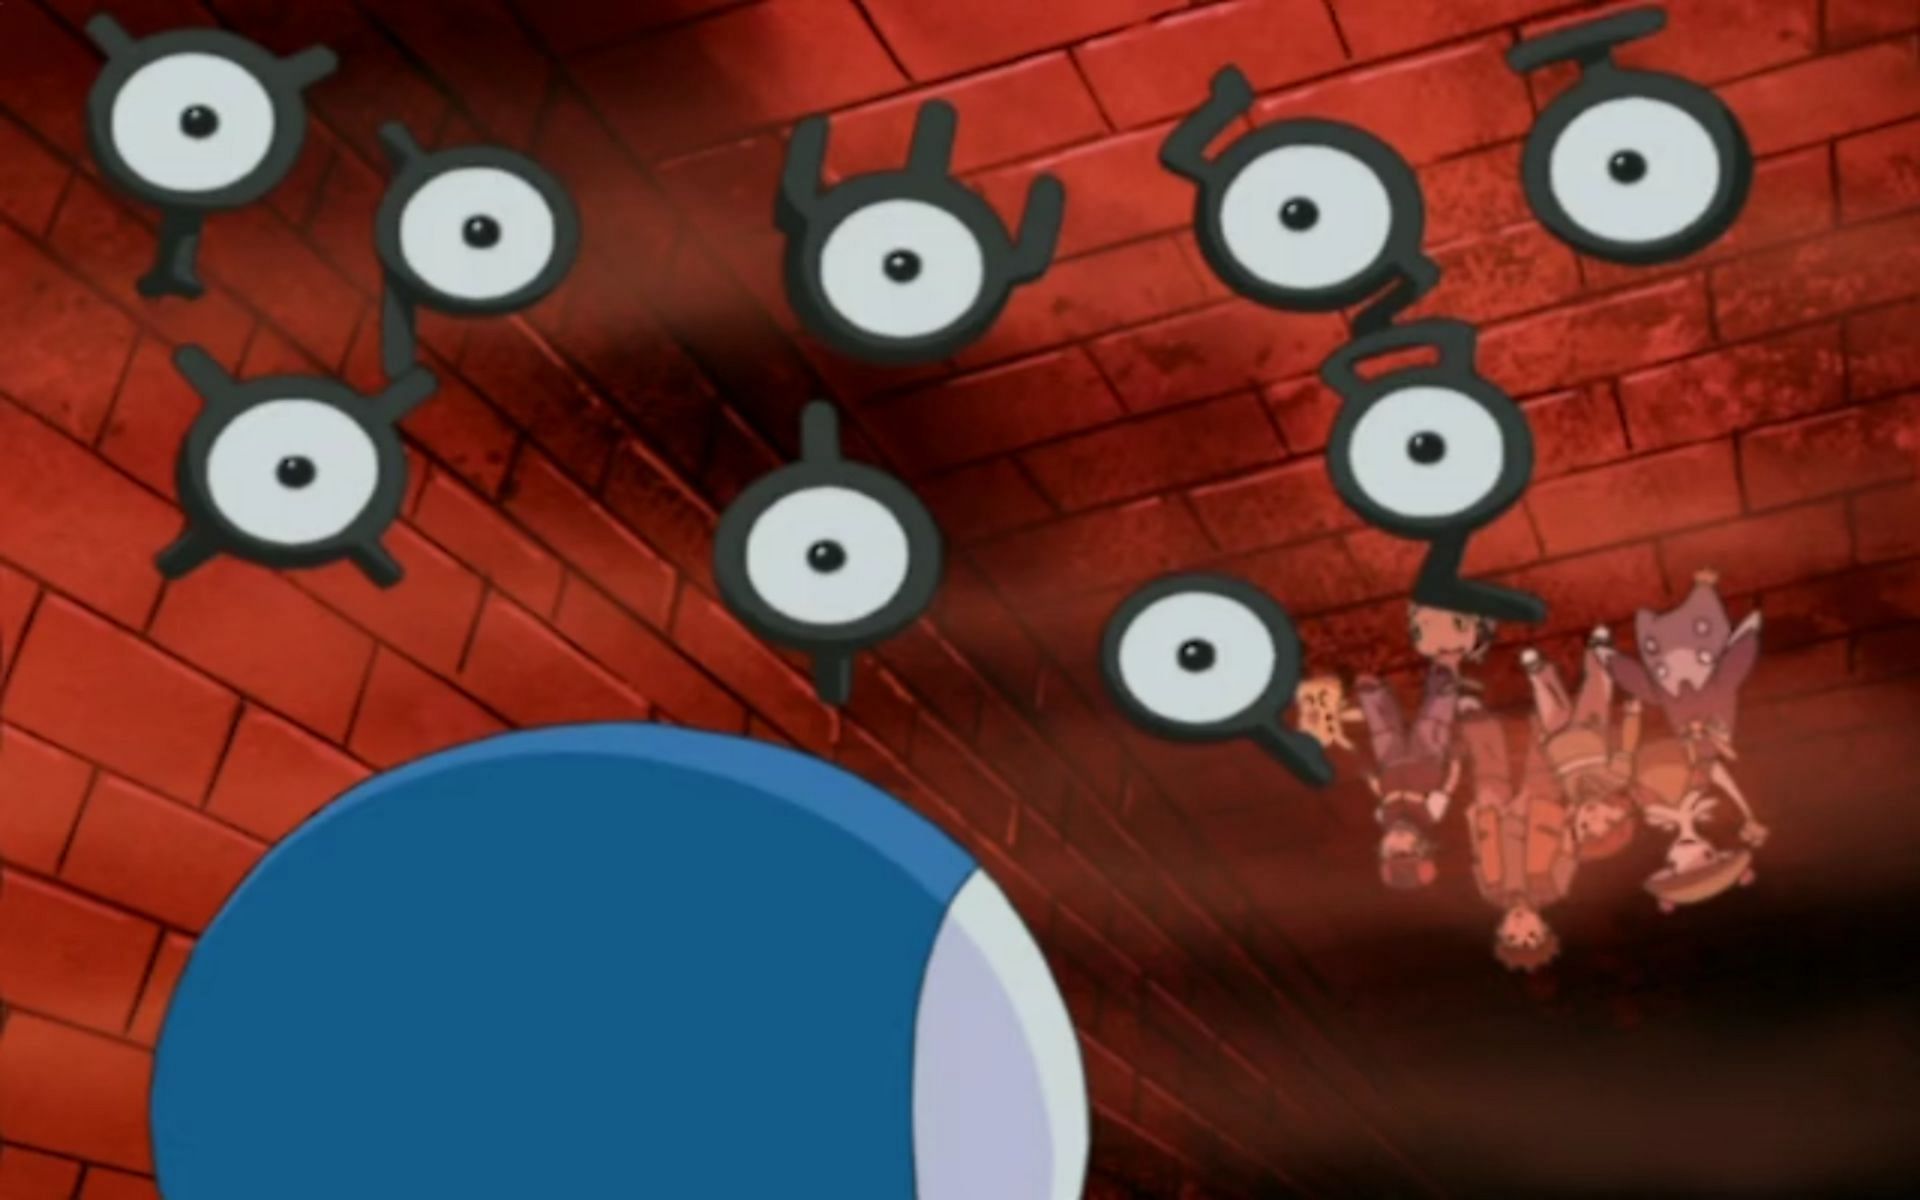 Unown can only learn the move Hidden Power (Image via The Pokemon Company)